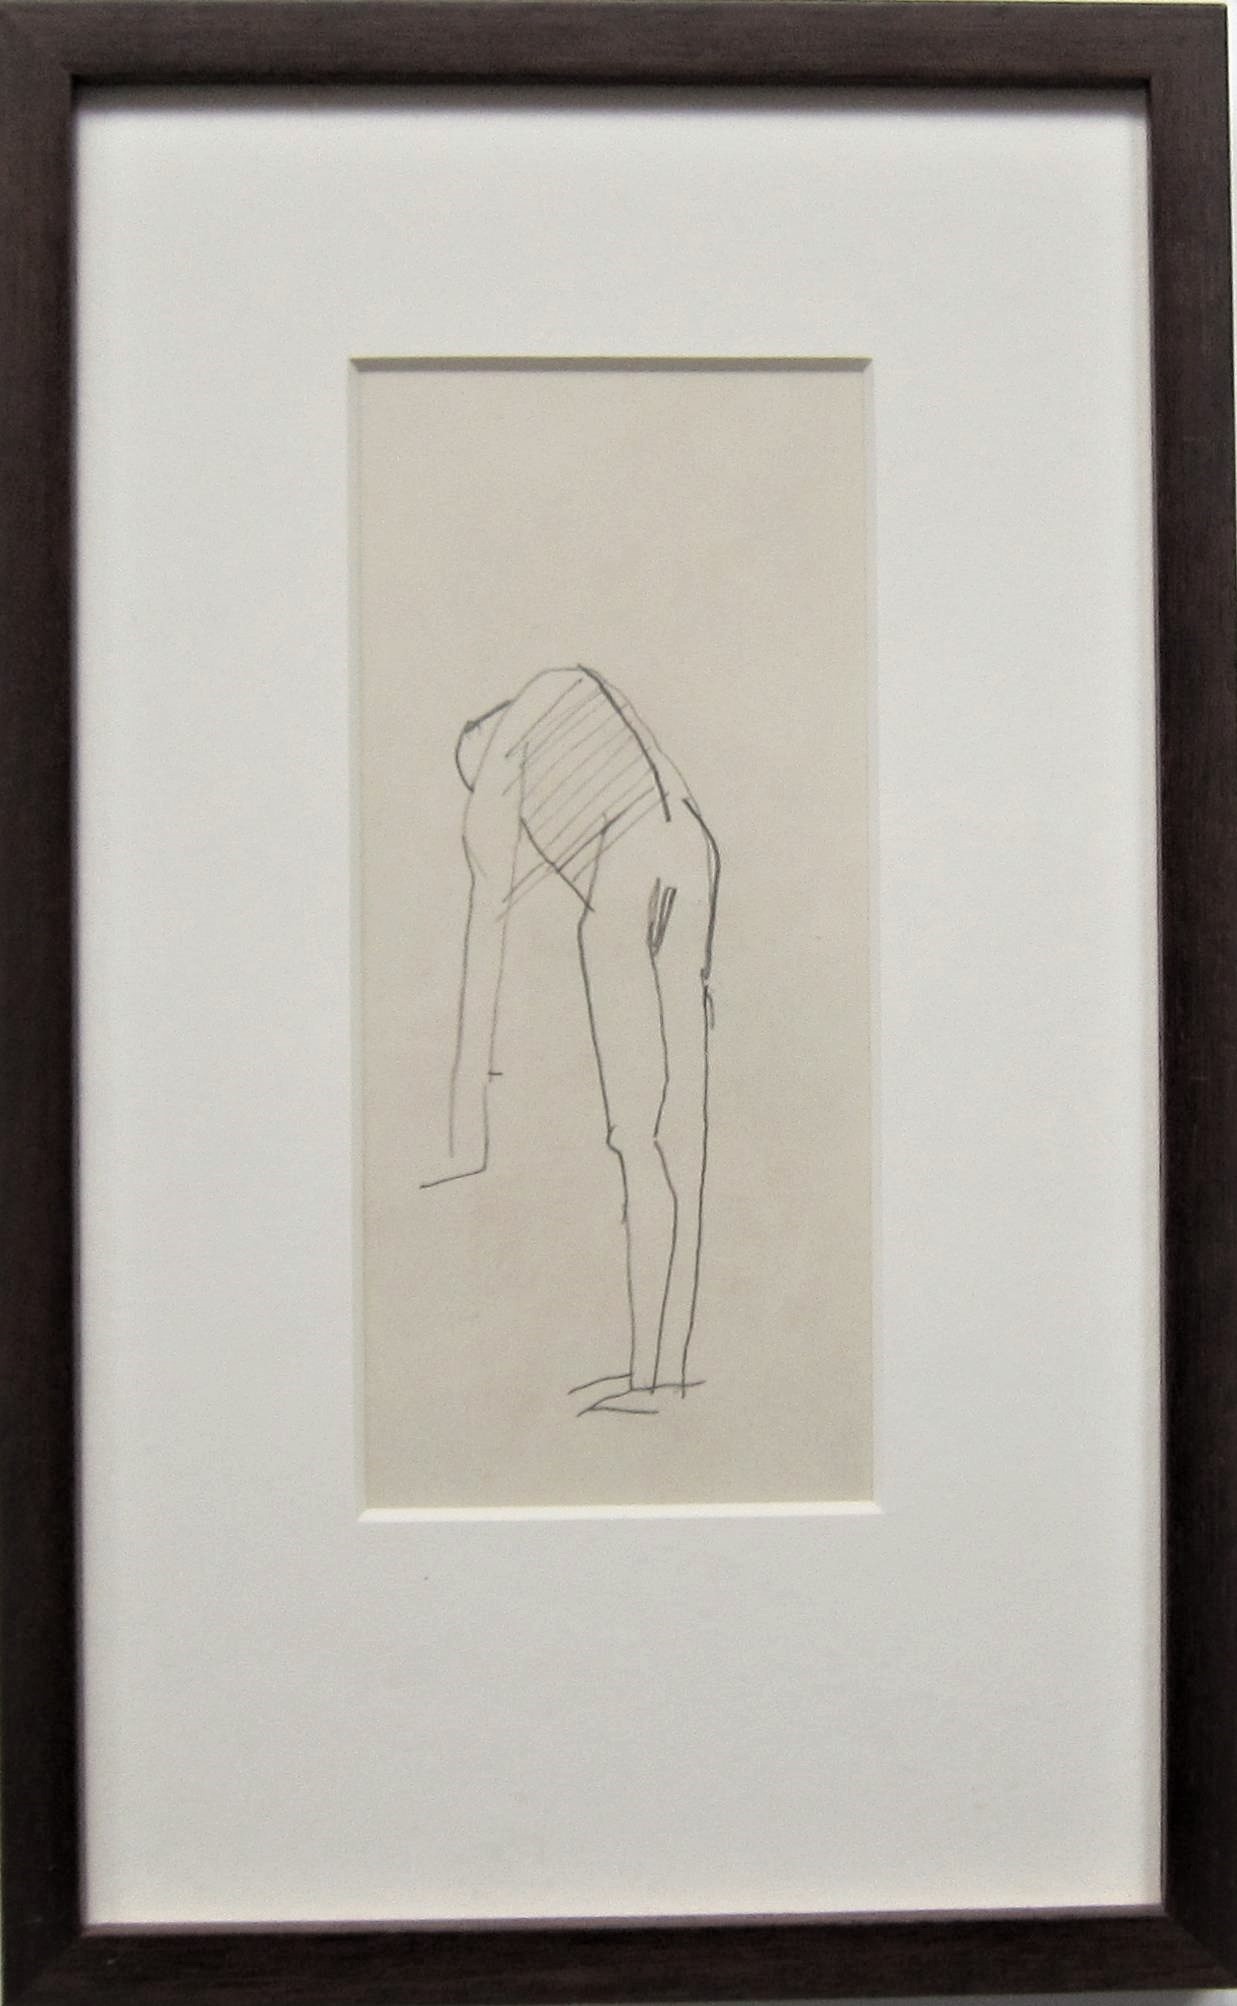 KEITH VAUGHAN [1912-77]. Bending Figure. pencil drawing. 14 x 7 cm - overall including frame 25 x 16 - Image 2 of 2